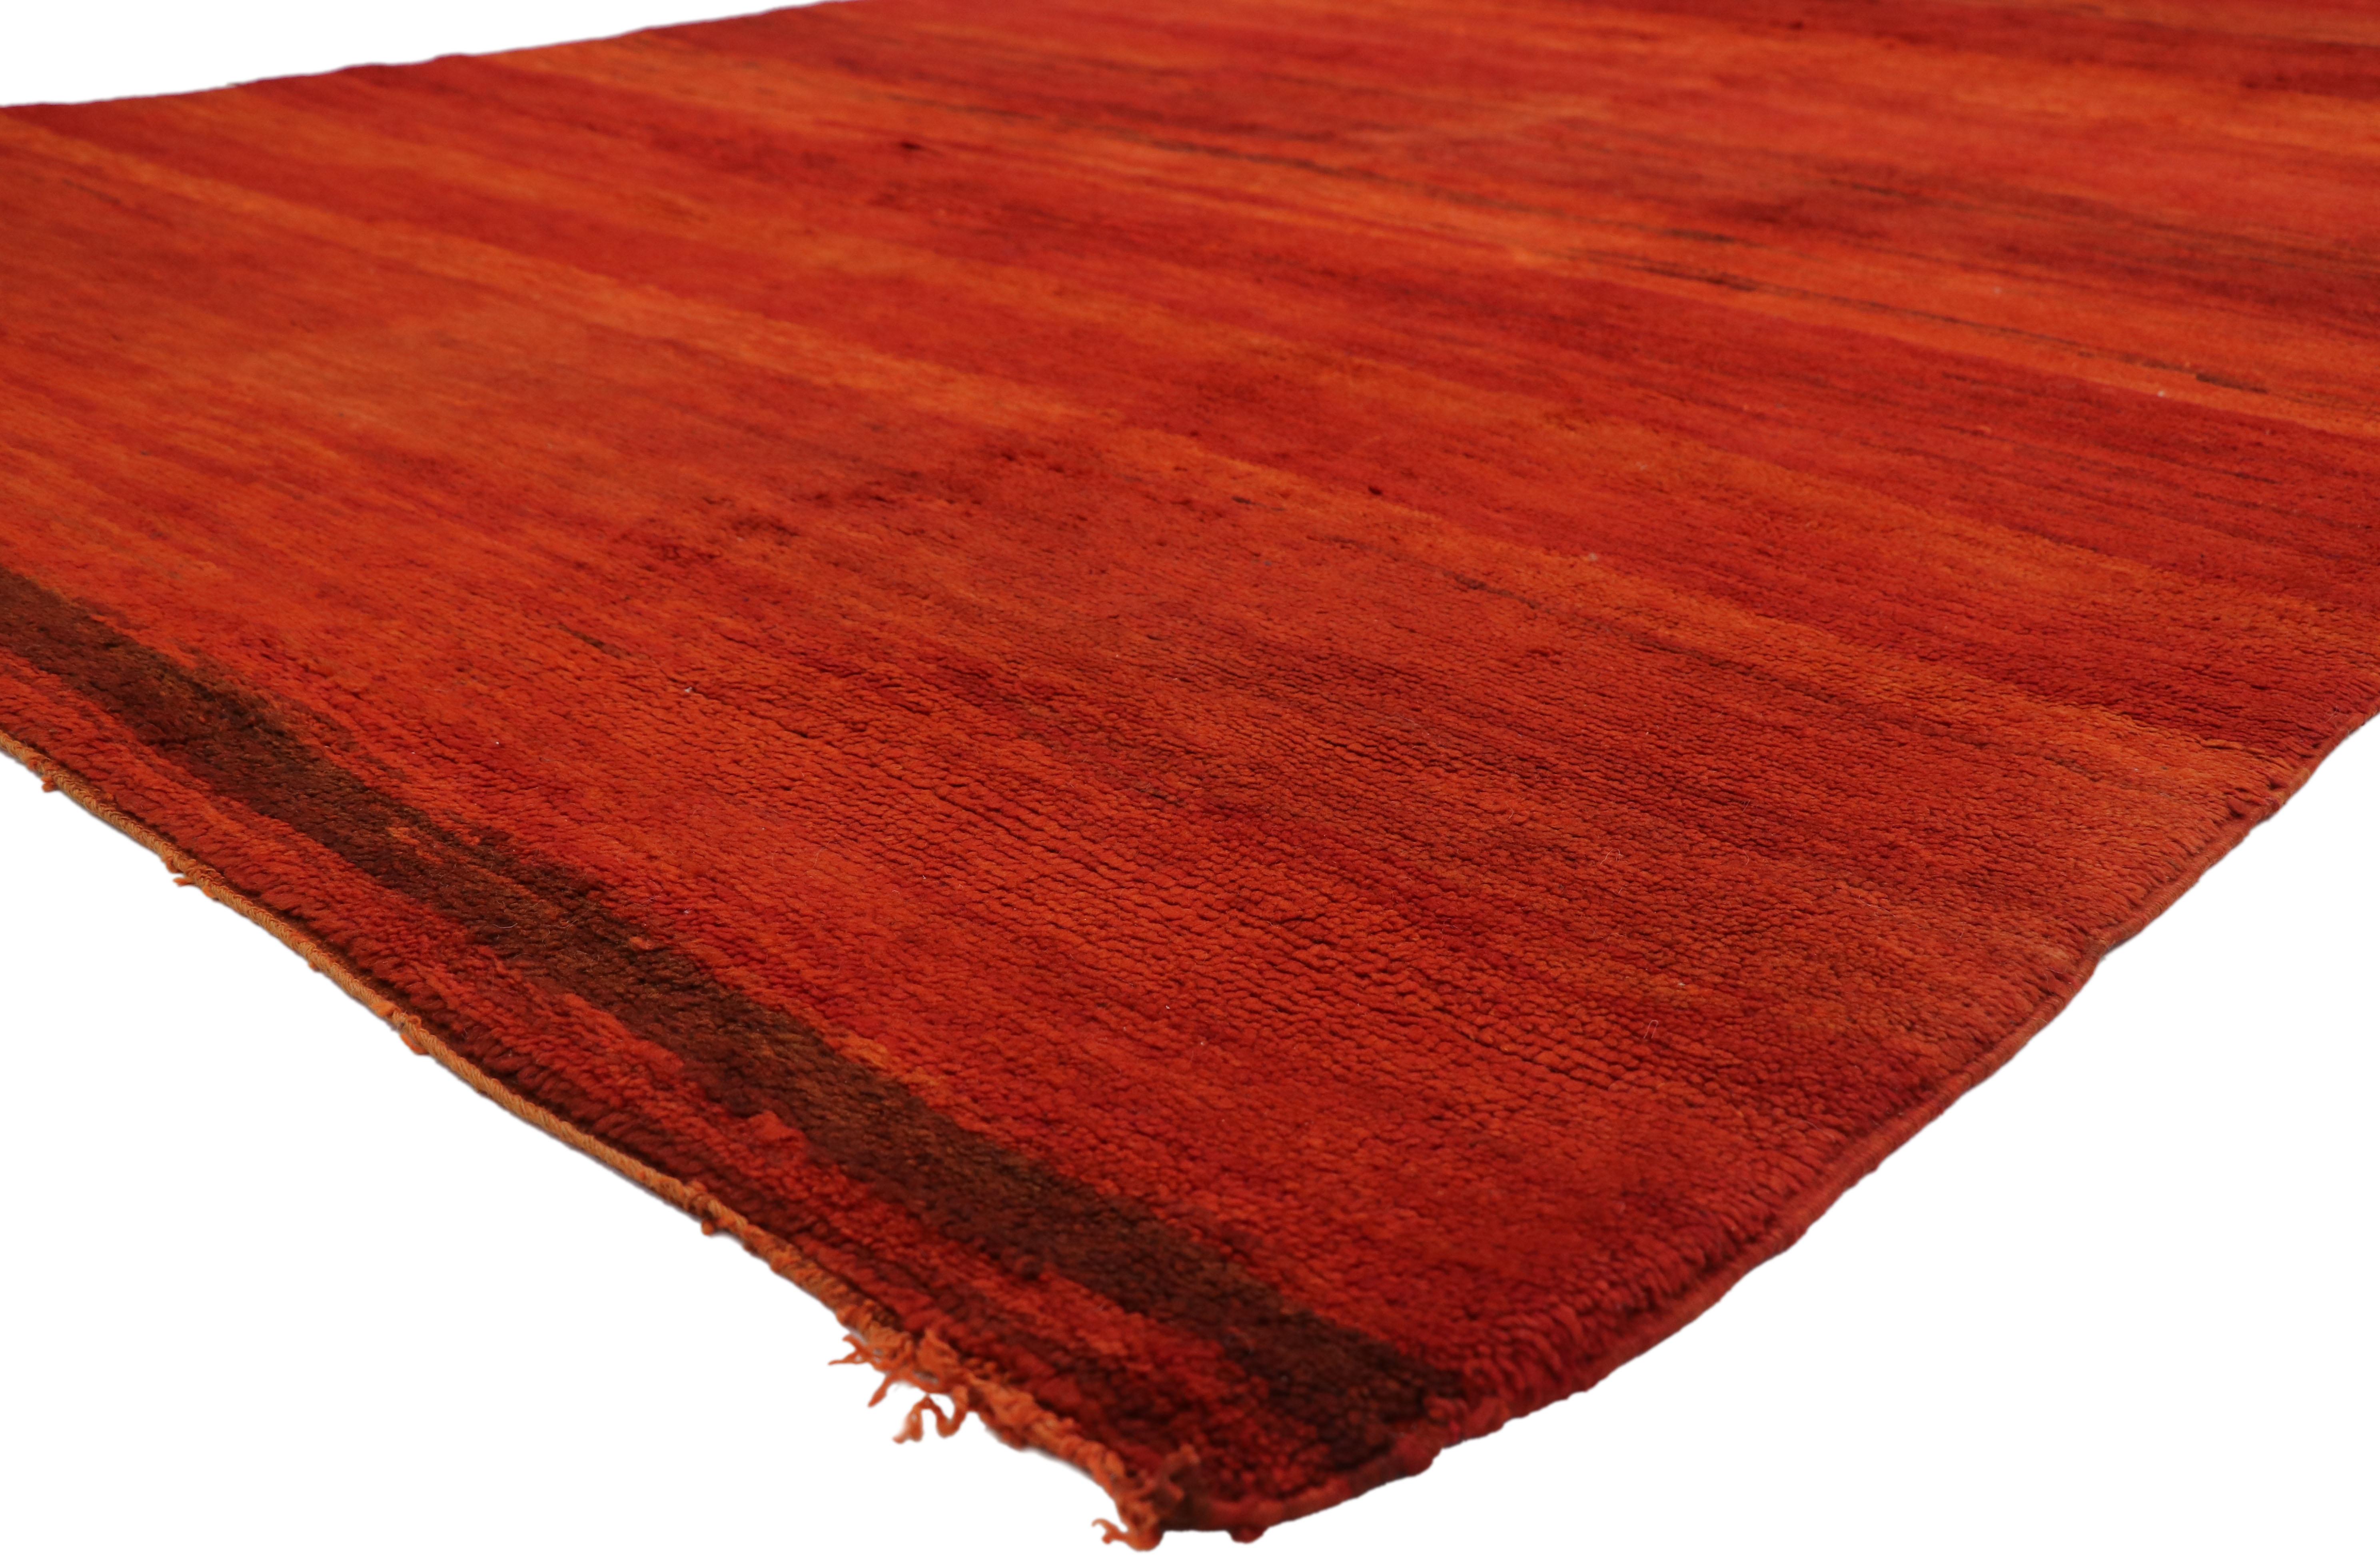 20894, vintage red Beni Mrirt Moroccan rug with Modern style Inspired by Mark Rothko. Featuring a luminous fiery glow, rich waves of abrash, and luxury underfoot, this hand knotted wool vintage Moroccan red Beni Mrirt rug draws inspiration from Mark